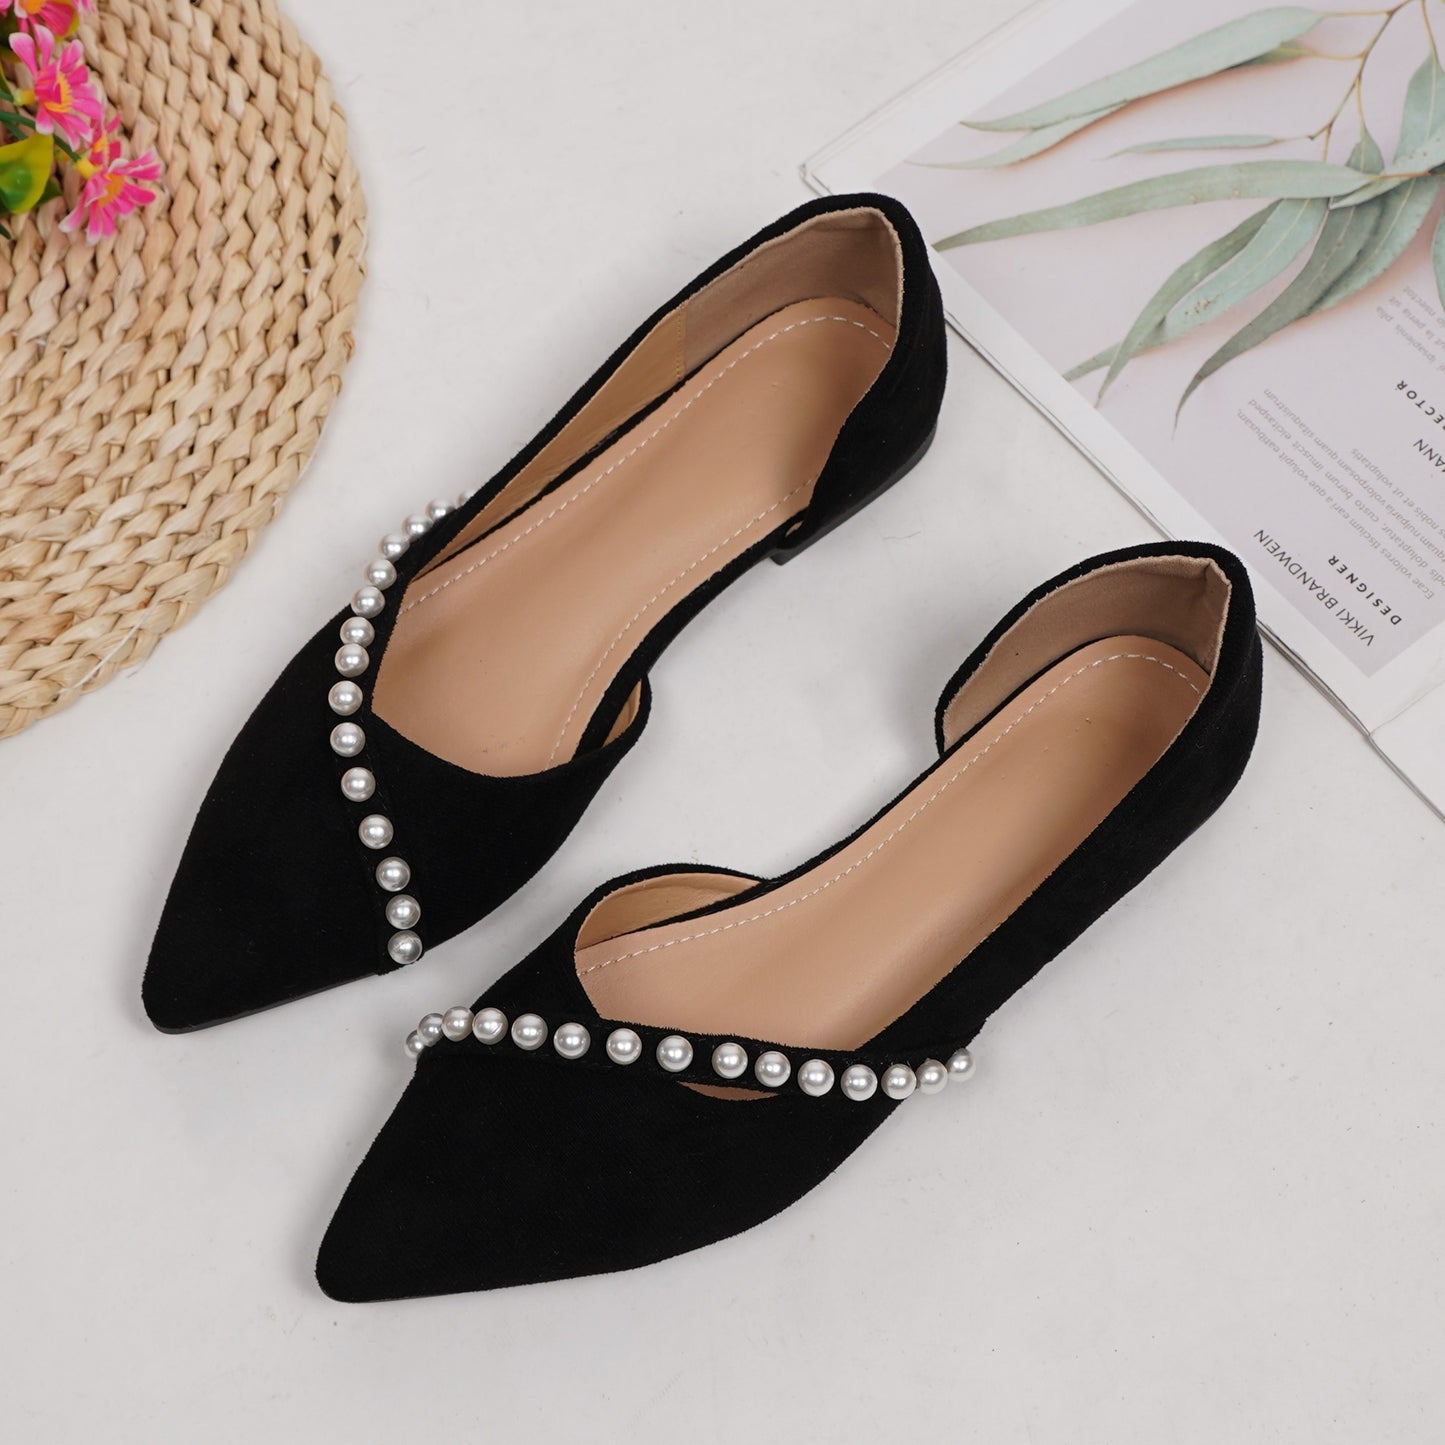 Women's Faux Pearl Decor Flat Shoes, Casual Point Toe Slip On Shoes, Lightweight & Comfortable Shoes